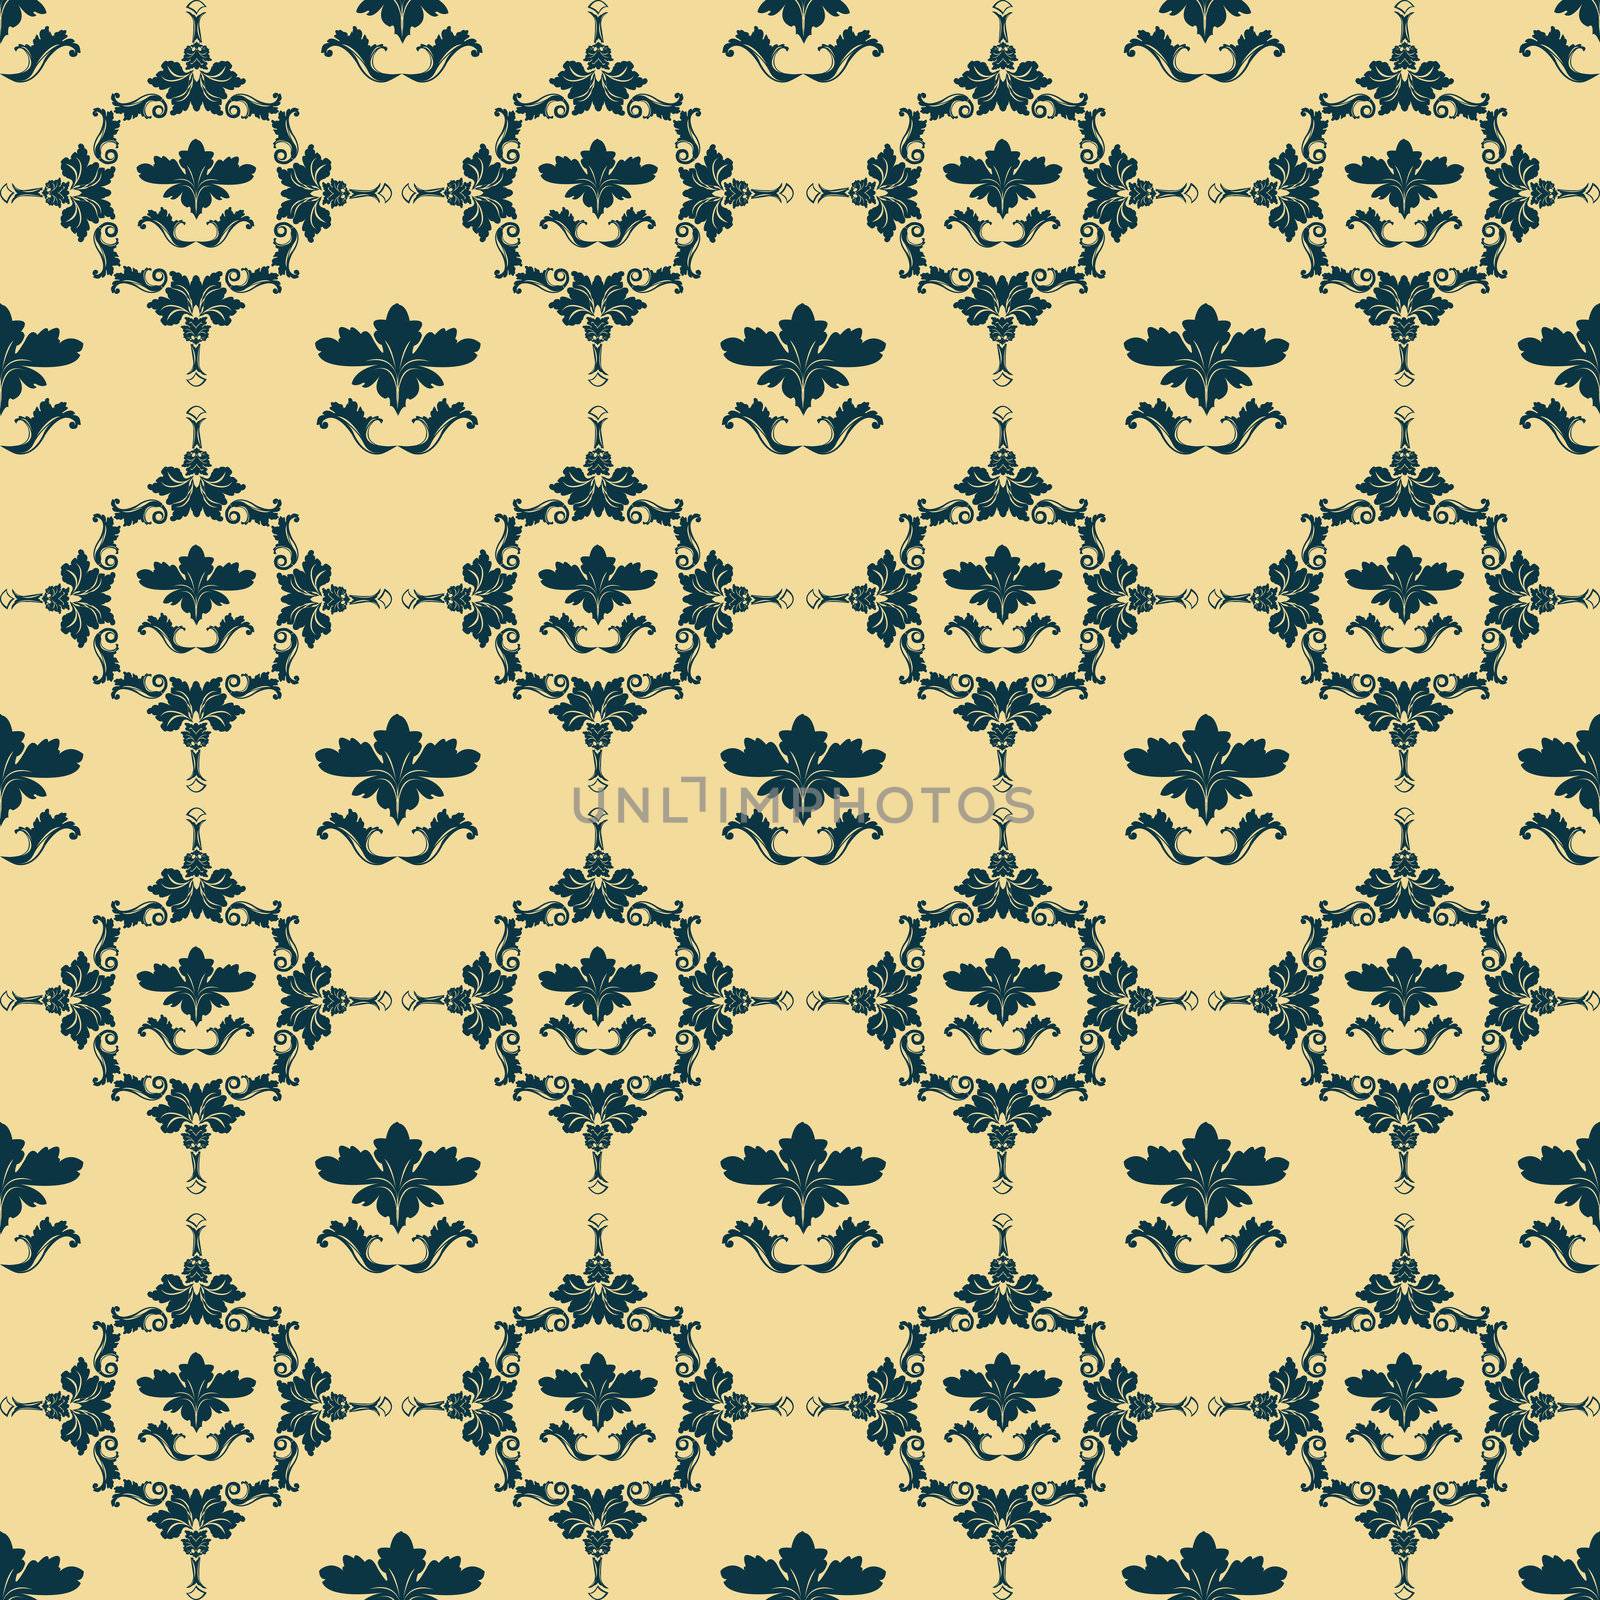 Classic wallpaper pattern with floral motives